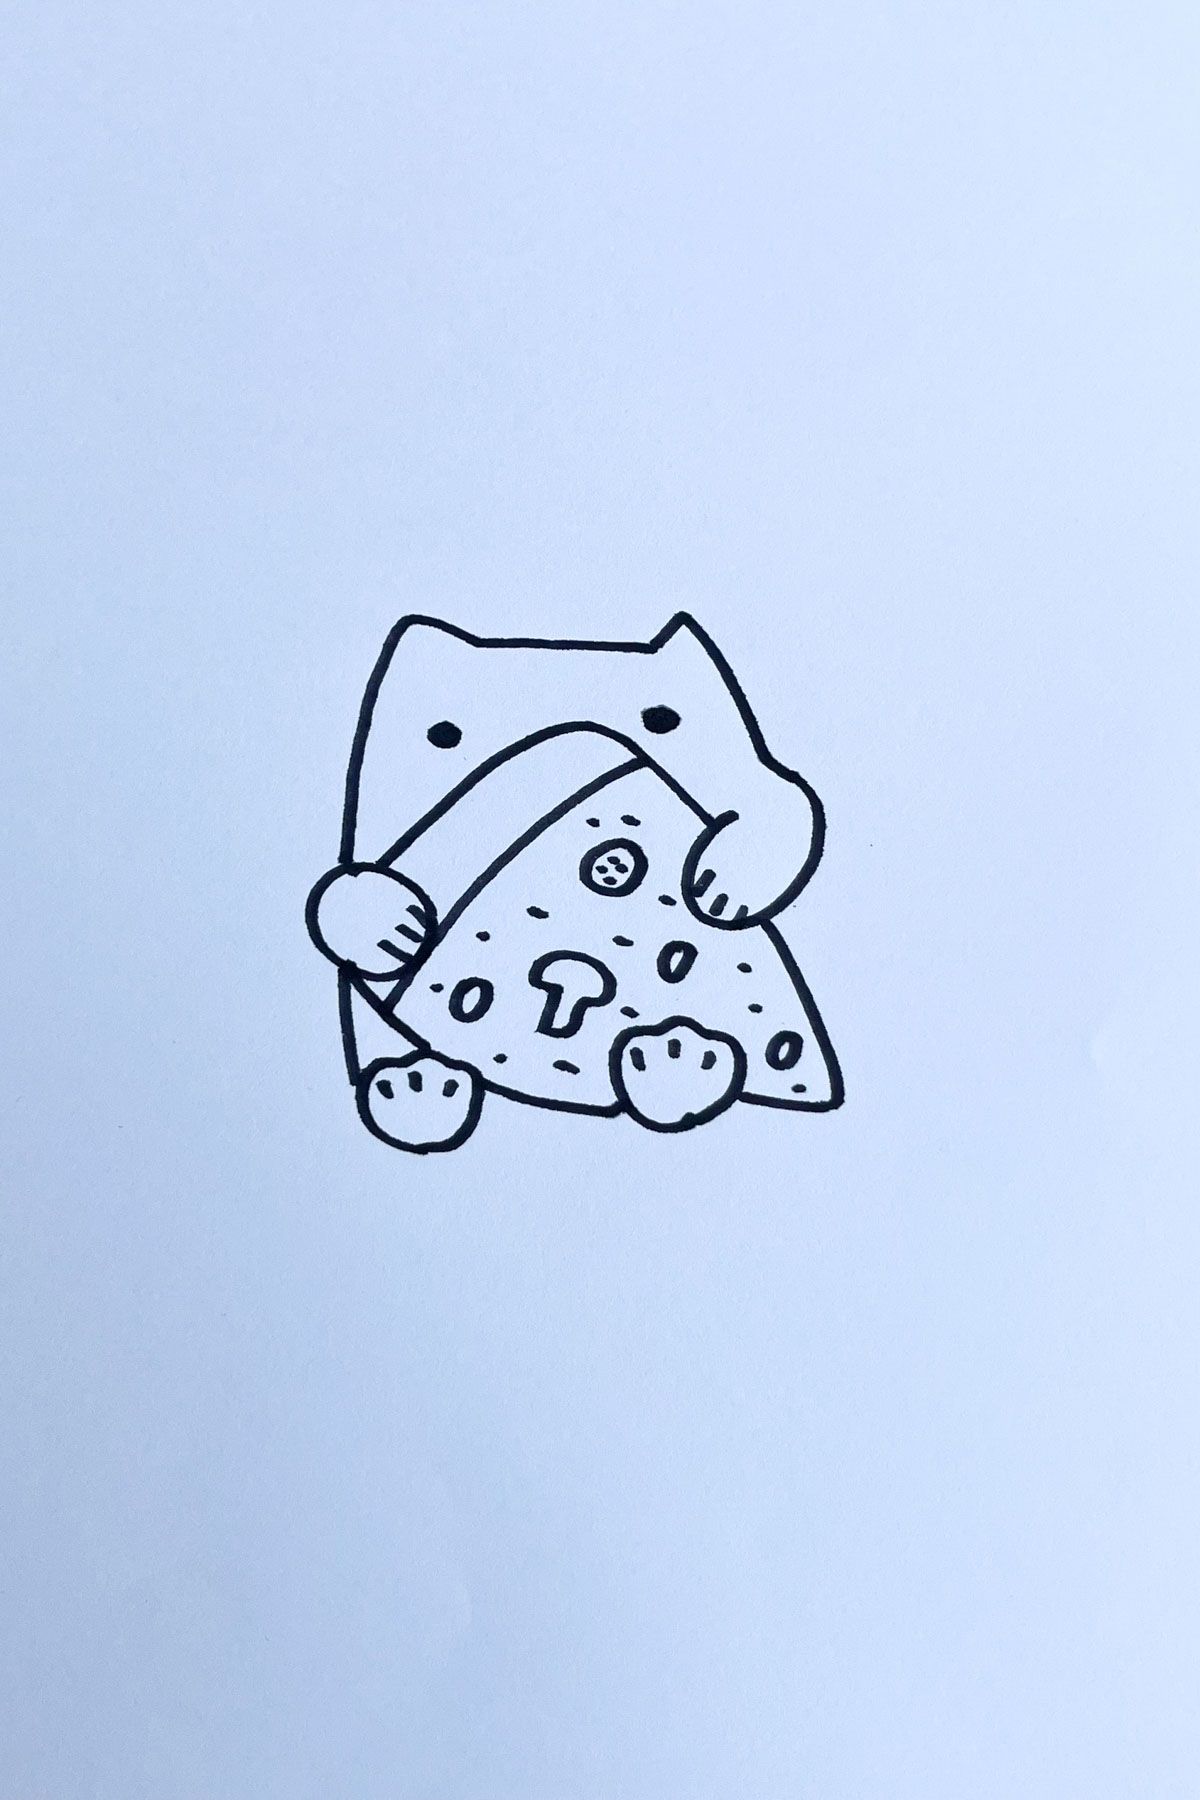 pizza cat anime drawing